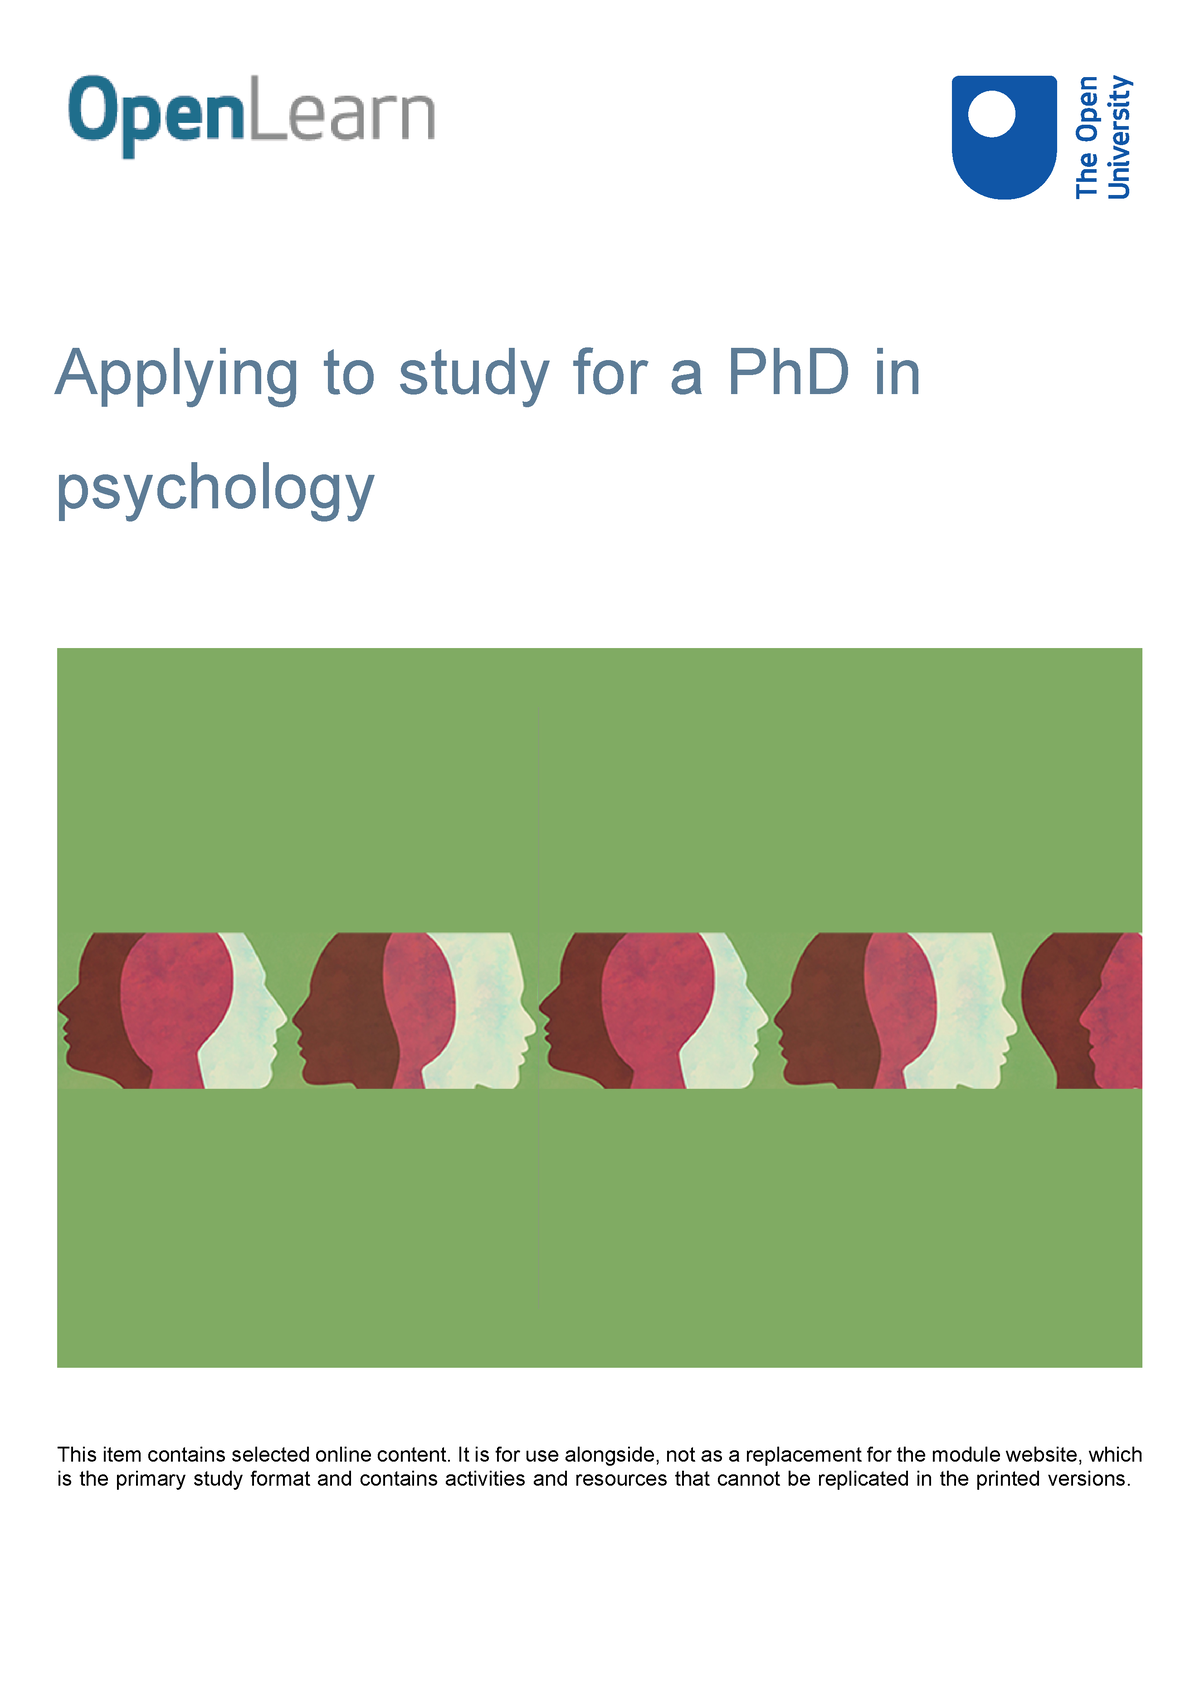 how to obtain a phd in psychology